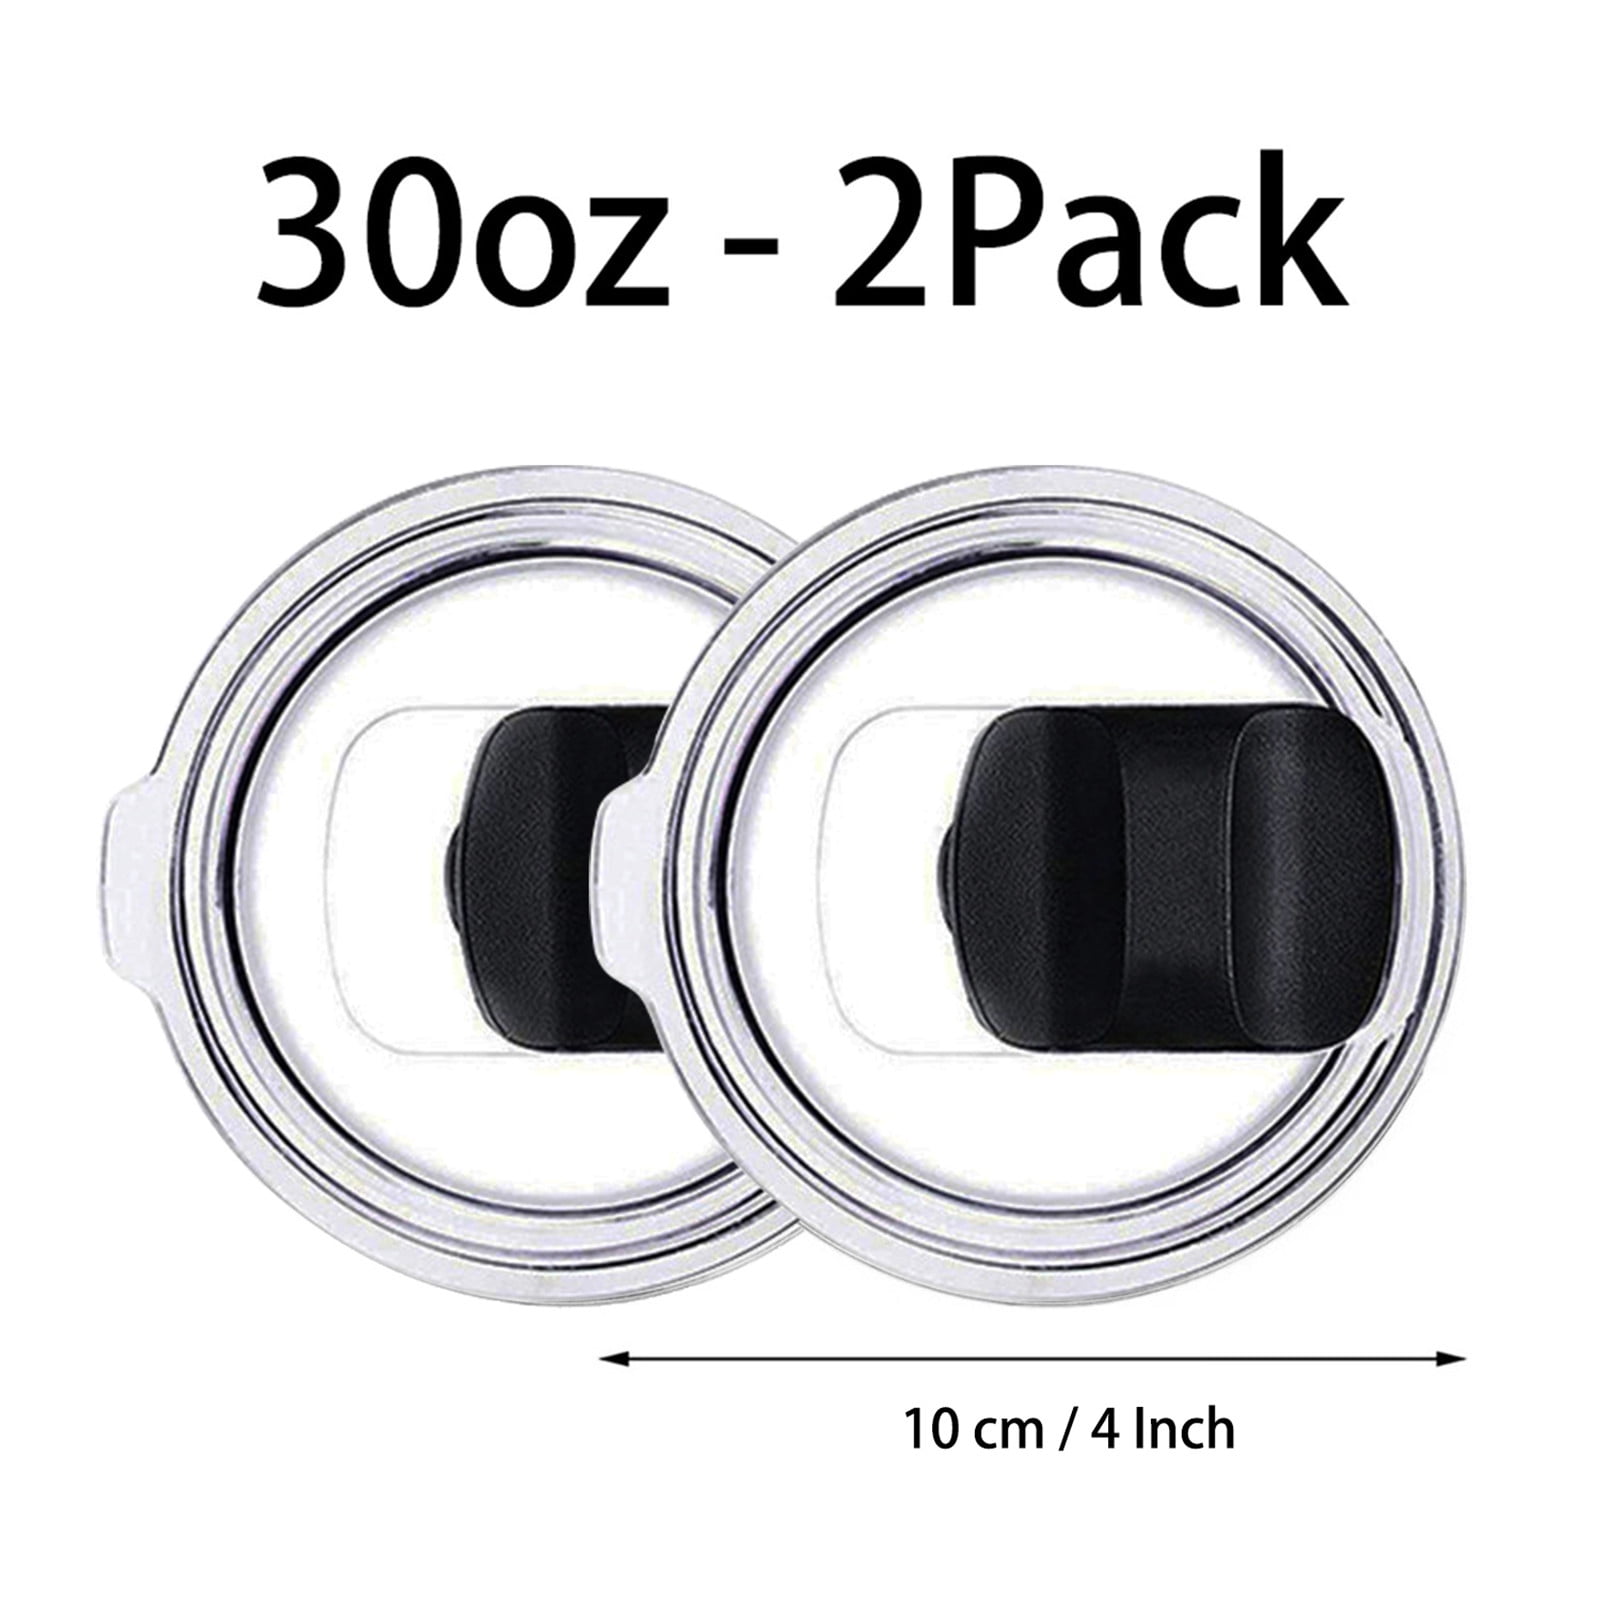 2 Pack 30oz Magnetic Tumbler Lid, Replacement Lids Compatible for YETI 30  oz Tumbler, 14 oz Mug and 35 oz Straw Mug, Travel Spill Proof Cup Lids  Covers with Magnetic Slider Switch